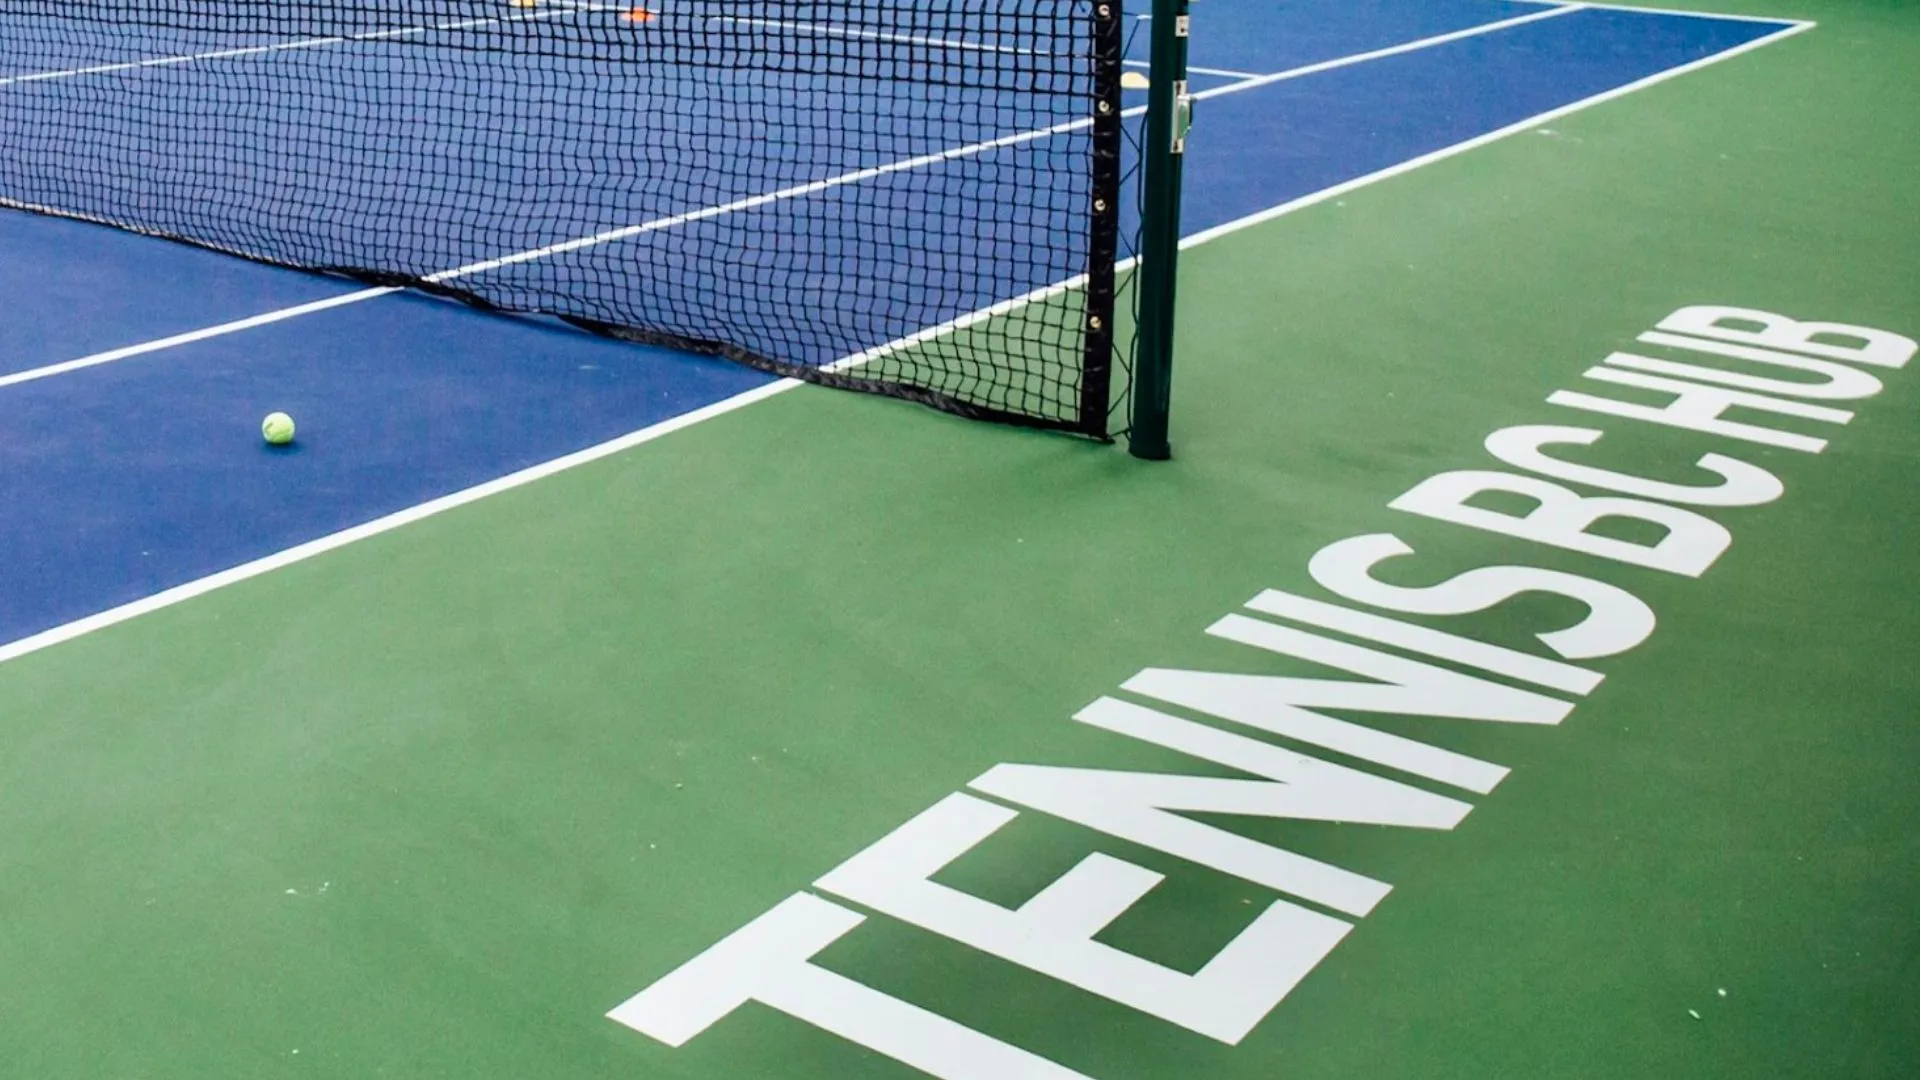 A tennis court branded for Tennis BC, a YMCA partner